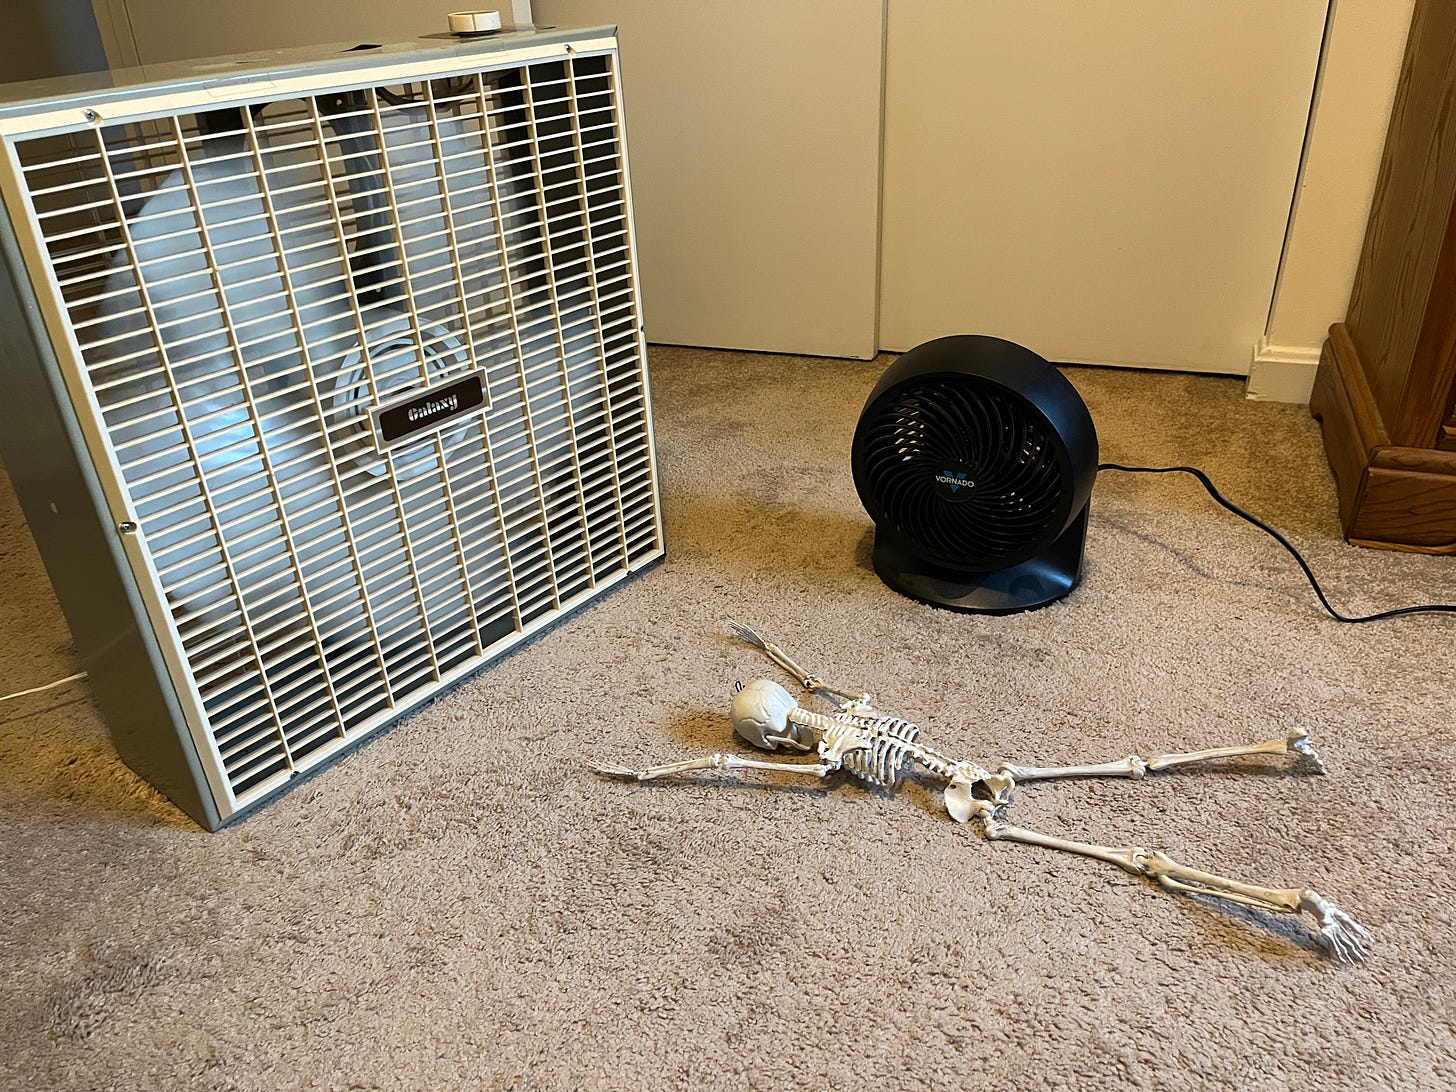 A photo of a toy skeleton lying facedown on the floor in front of two fans.